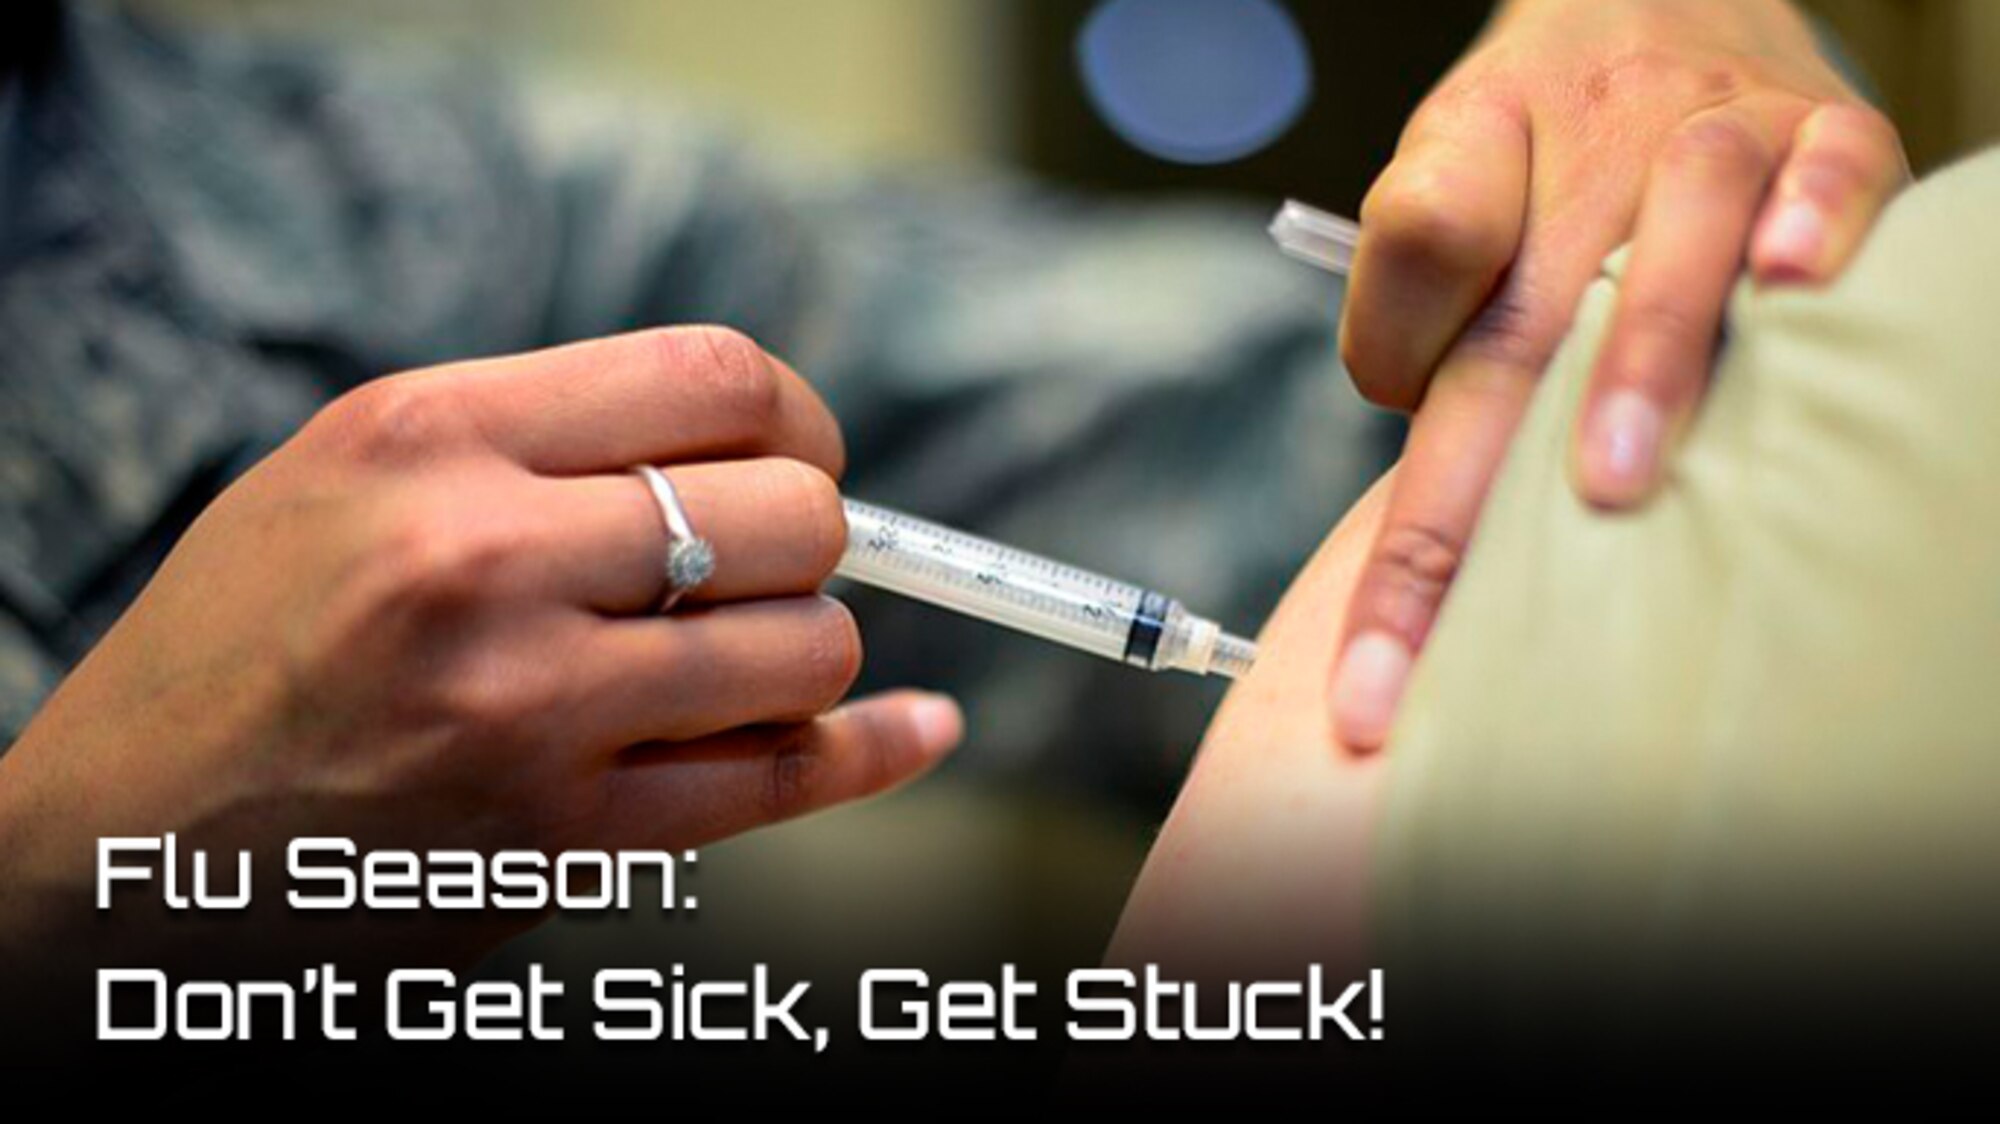 Getting the flu vaccine every year is the best way to protect you, your family and your community from the flu.